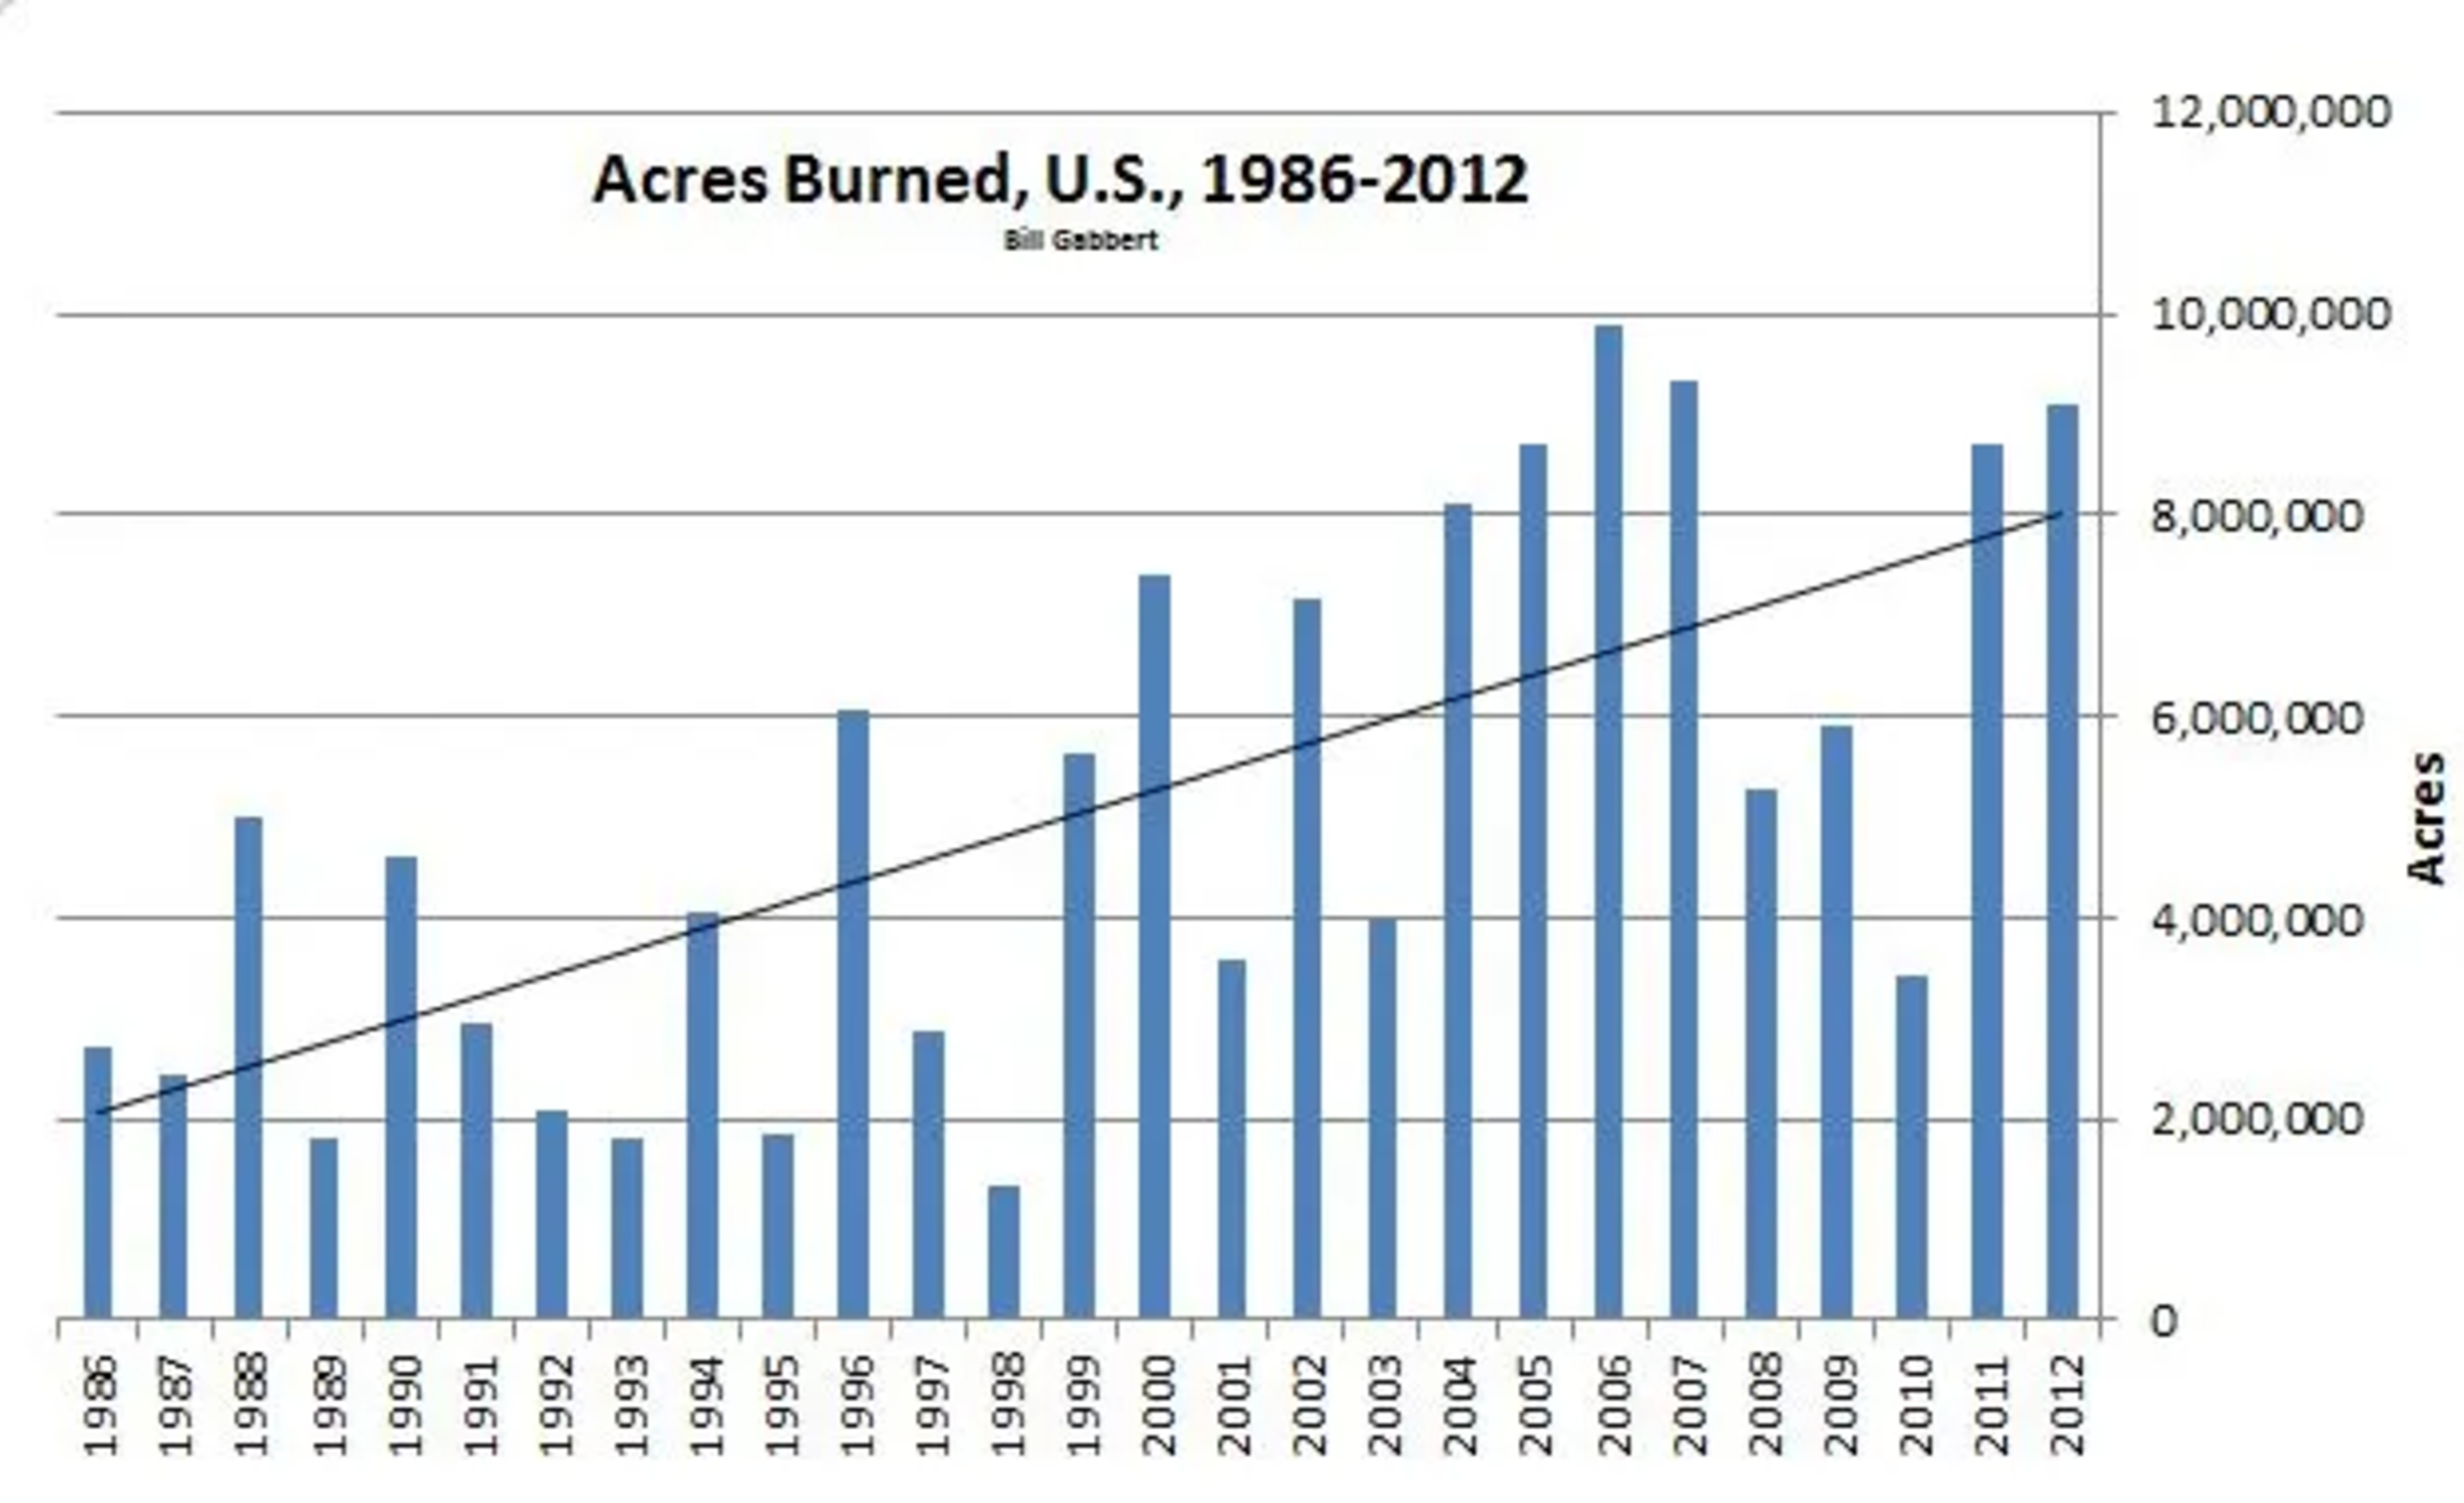 Acres all 50 states Wildfire Data